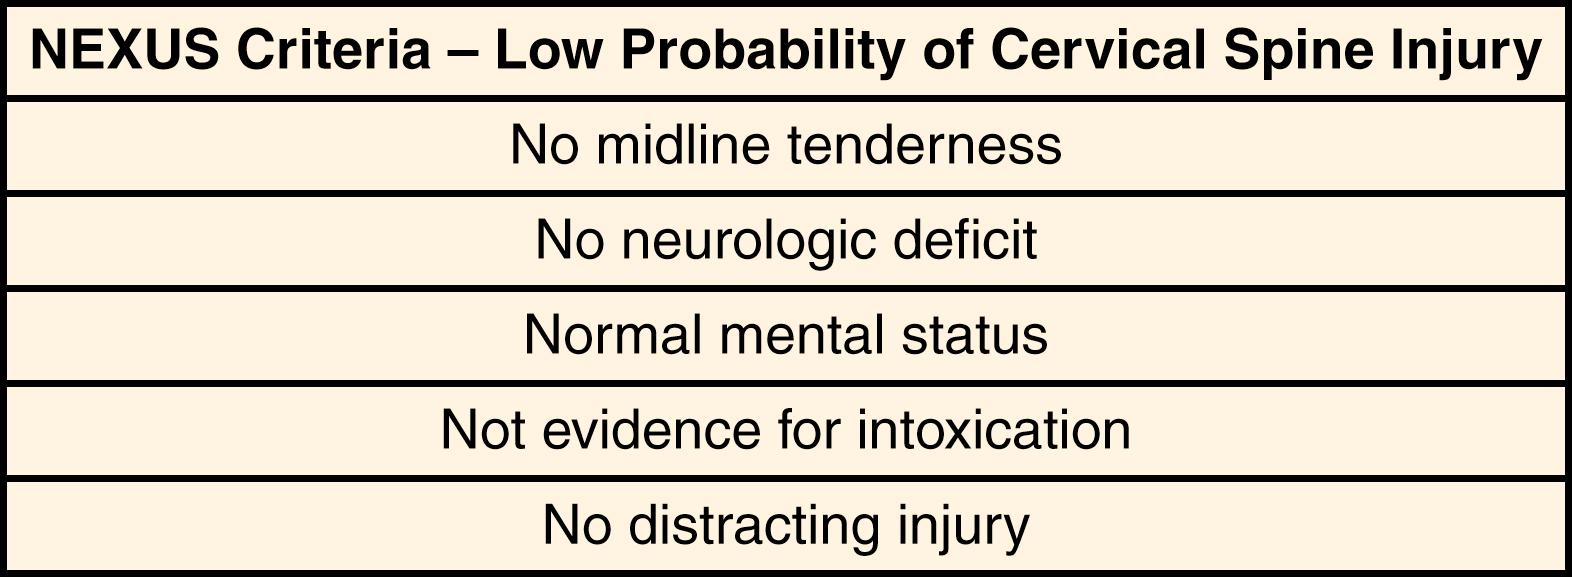 FIGURE 159.1, NEXUS criteria (Adapted from Hoffman et al, Validity of a set of clinical criteria to rule out injury to the cervical spine in patients with blunt trauma. National Emergency X-Radiography Utilization Study Group, N Eng J Med. 2000;343(2):94-99.).